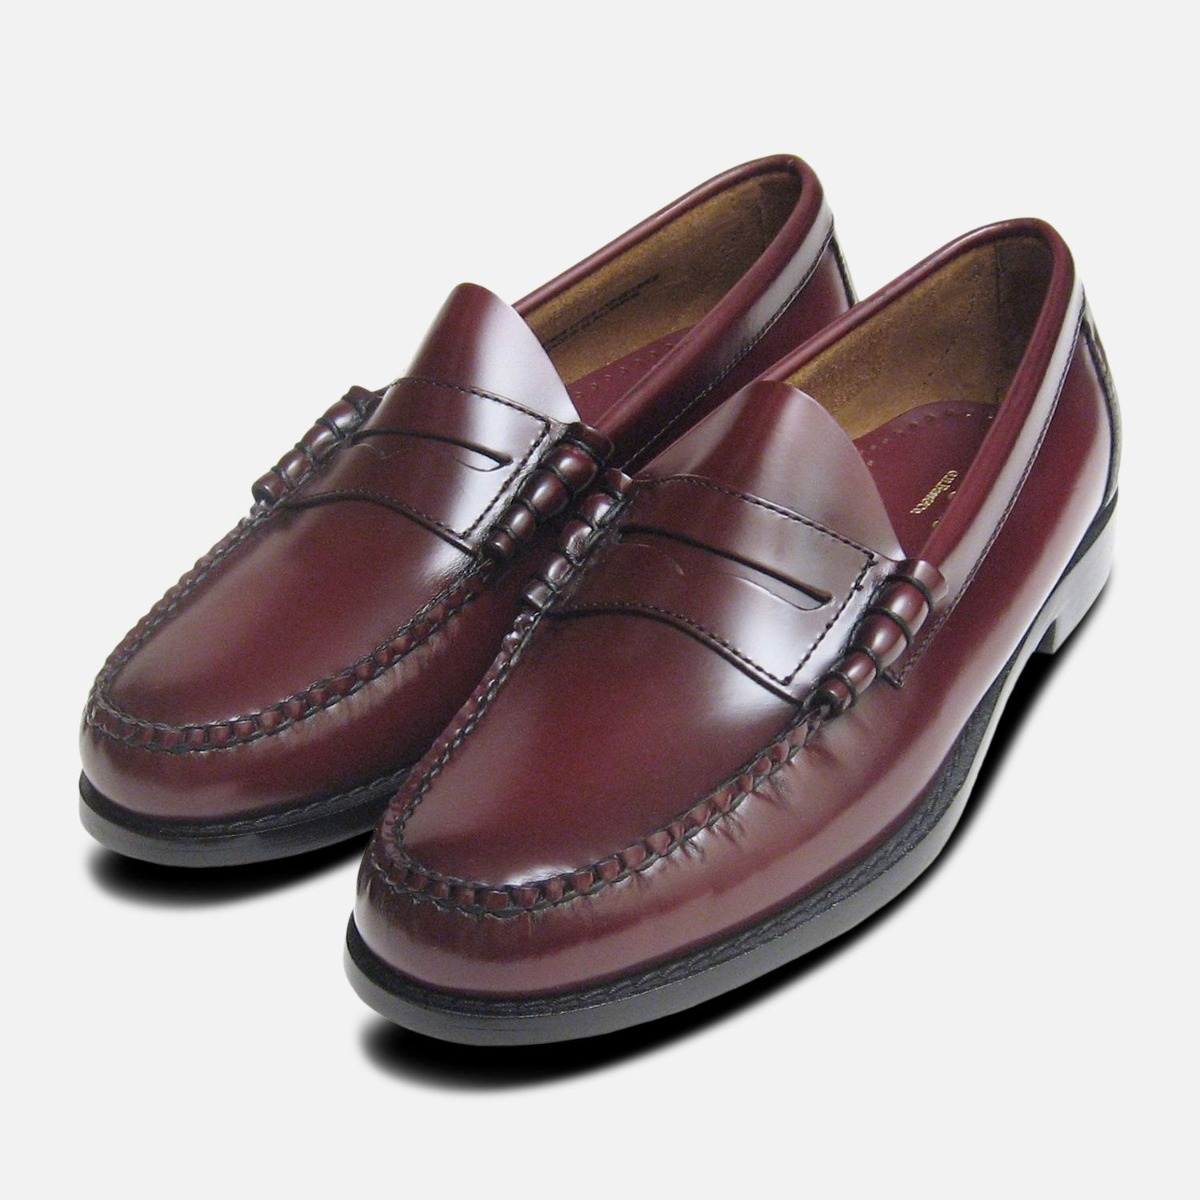 Classic Mens Burgundy Wine Larson Penny Loafers GH Bass Weejuns | eBay